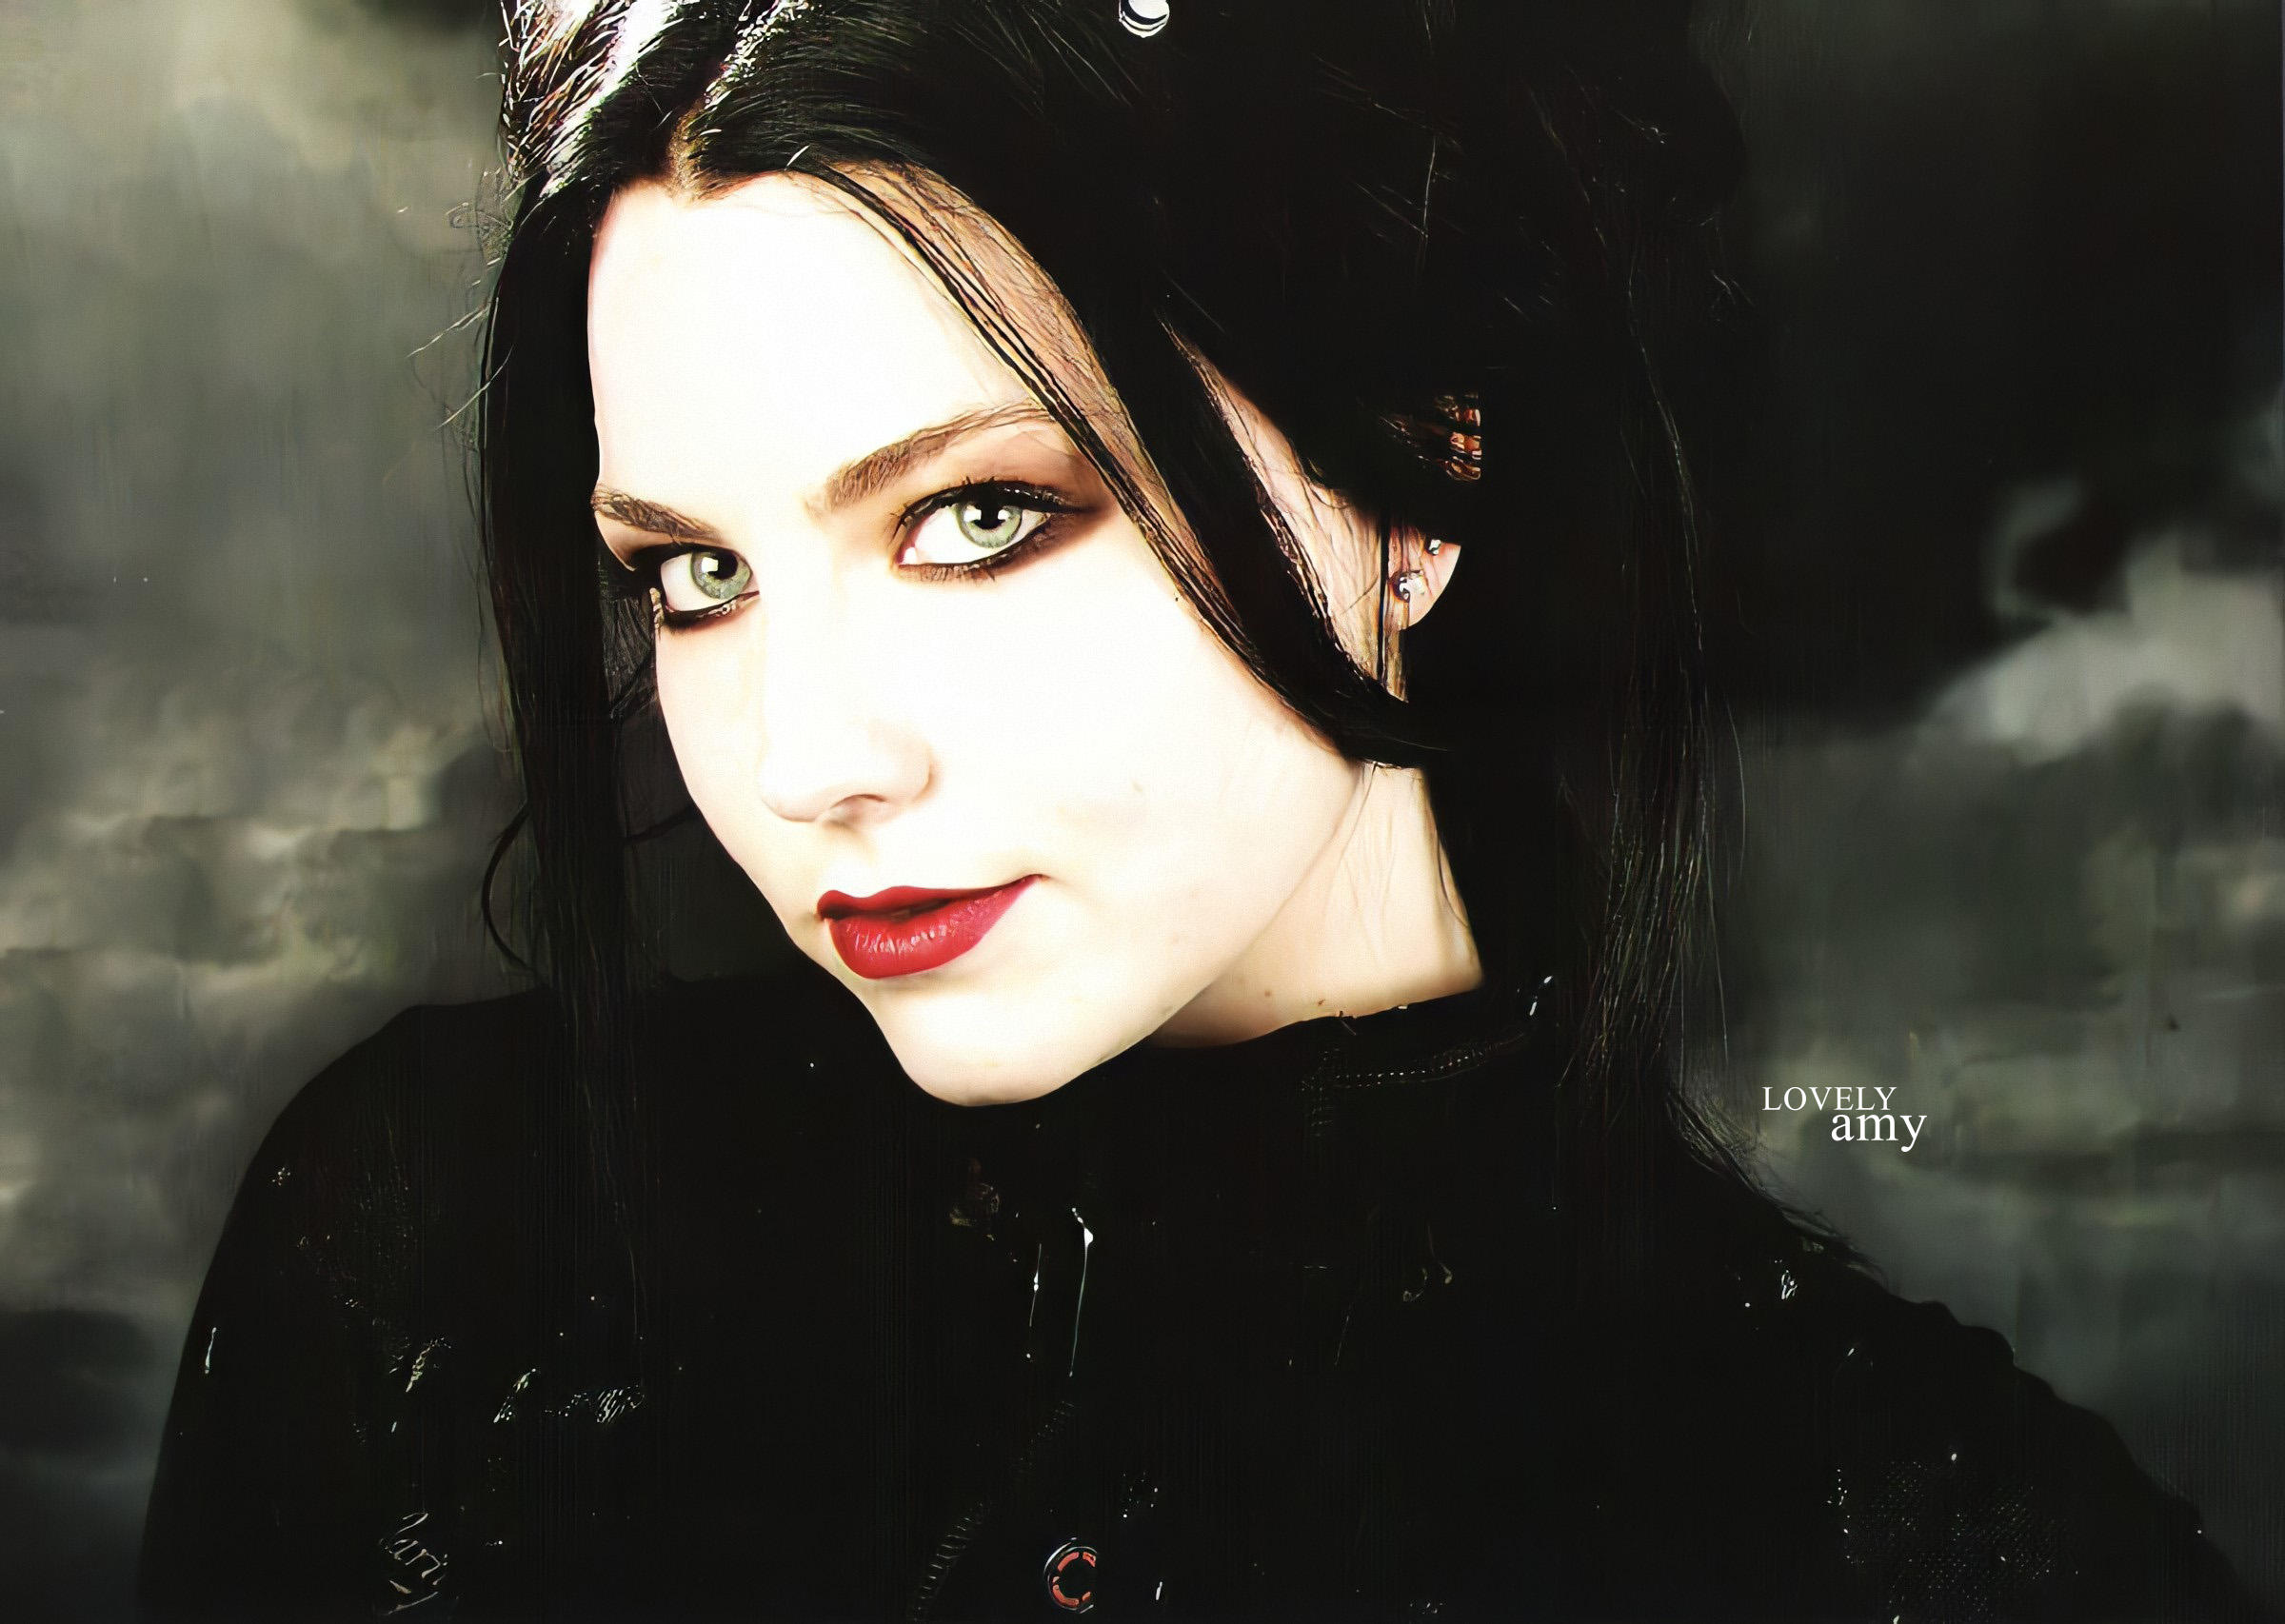 2400x1706
Keywords: amy lee;photoshoot;the open door;black and white;butterfly